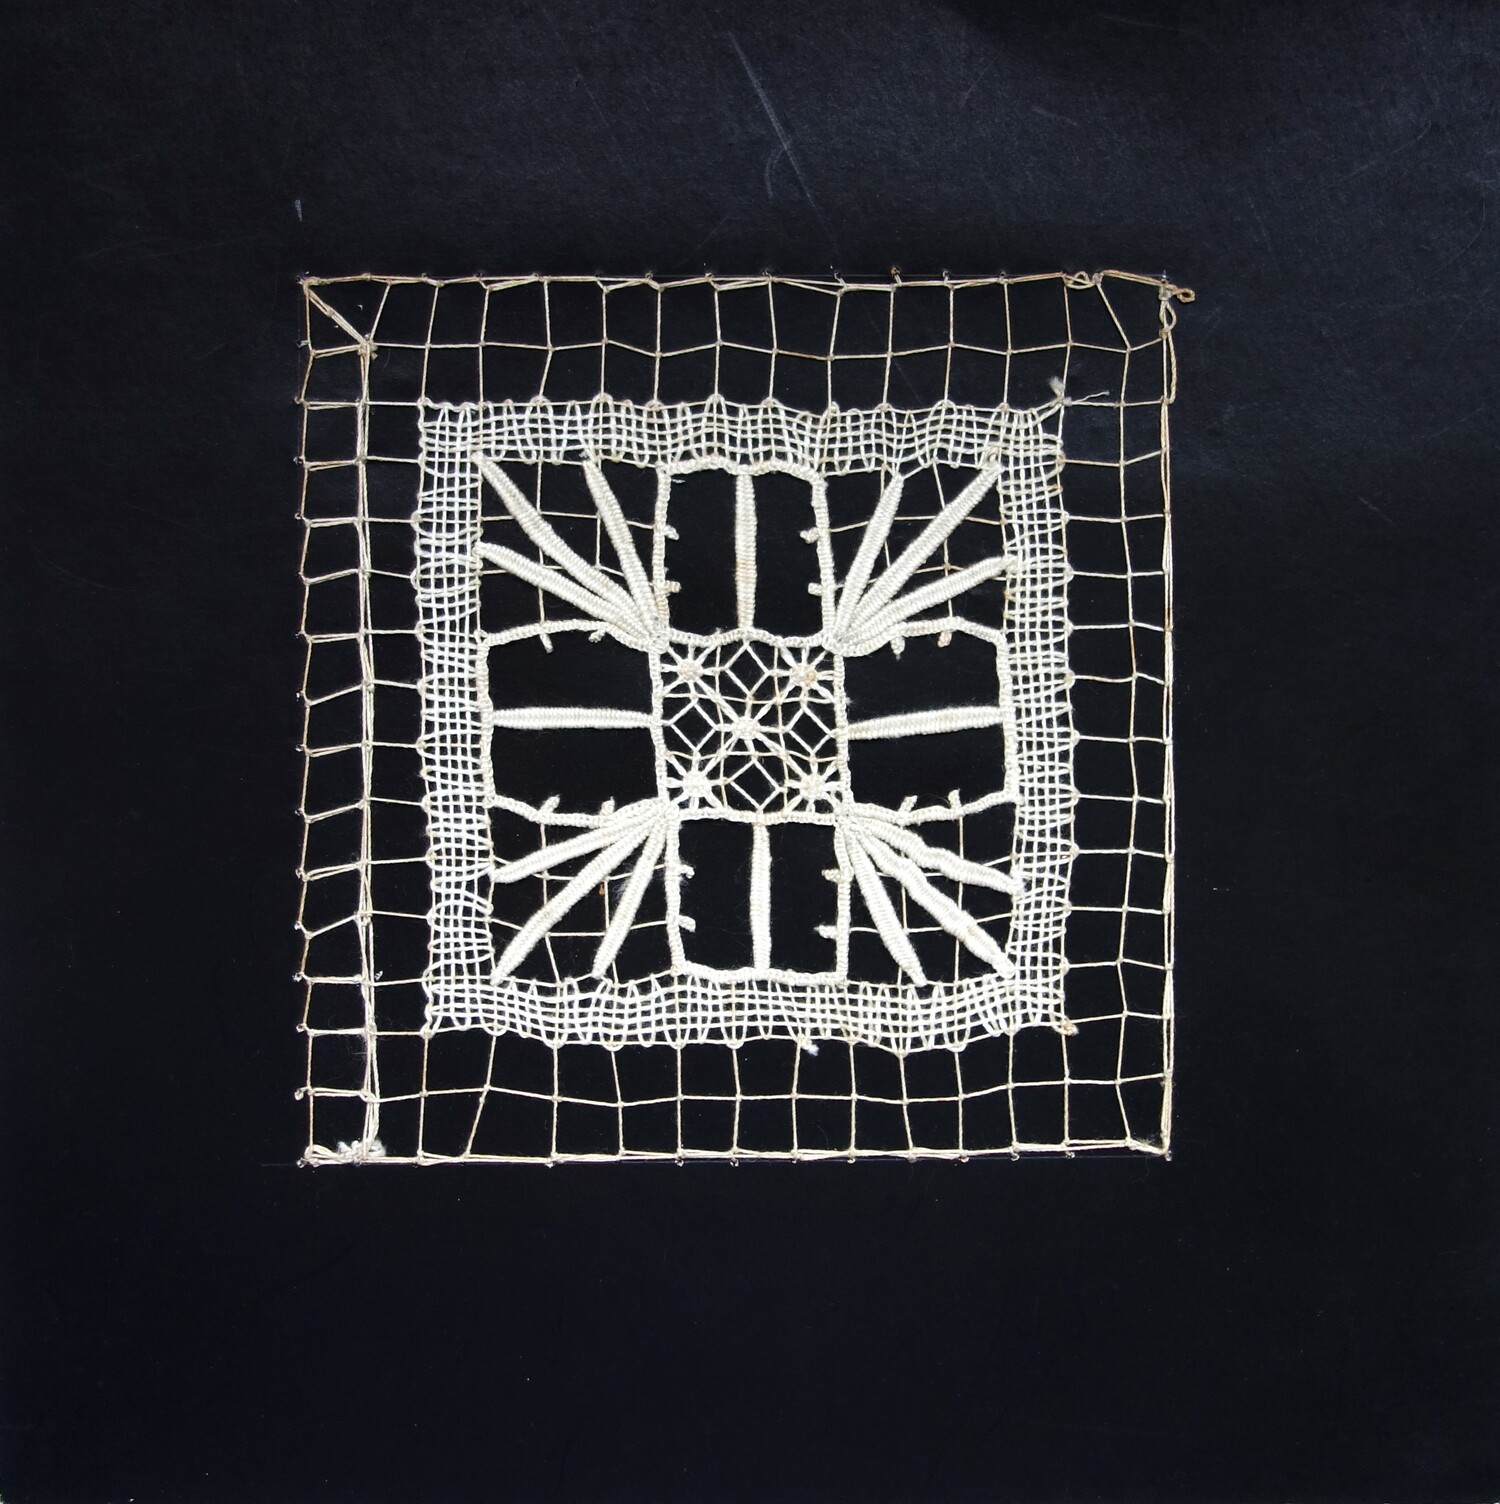 Piece of black card with a sample of square network with darned and needle woven patterns. Worked by G.H.P. Wening, c. 1922 (TRC 2023.2805.022).